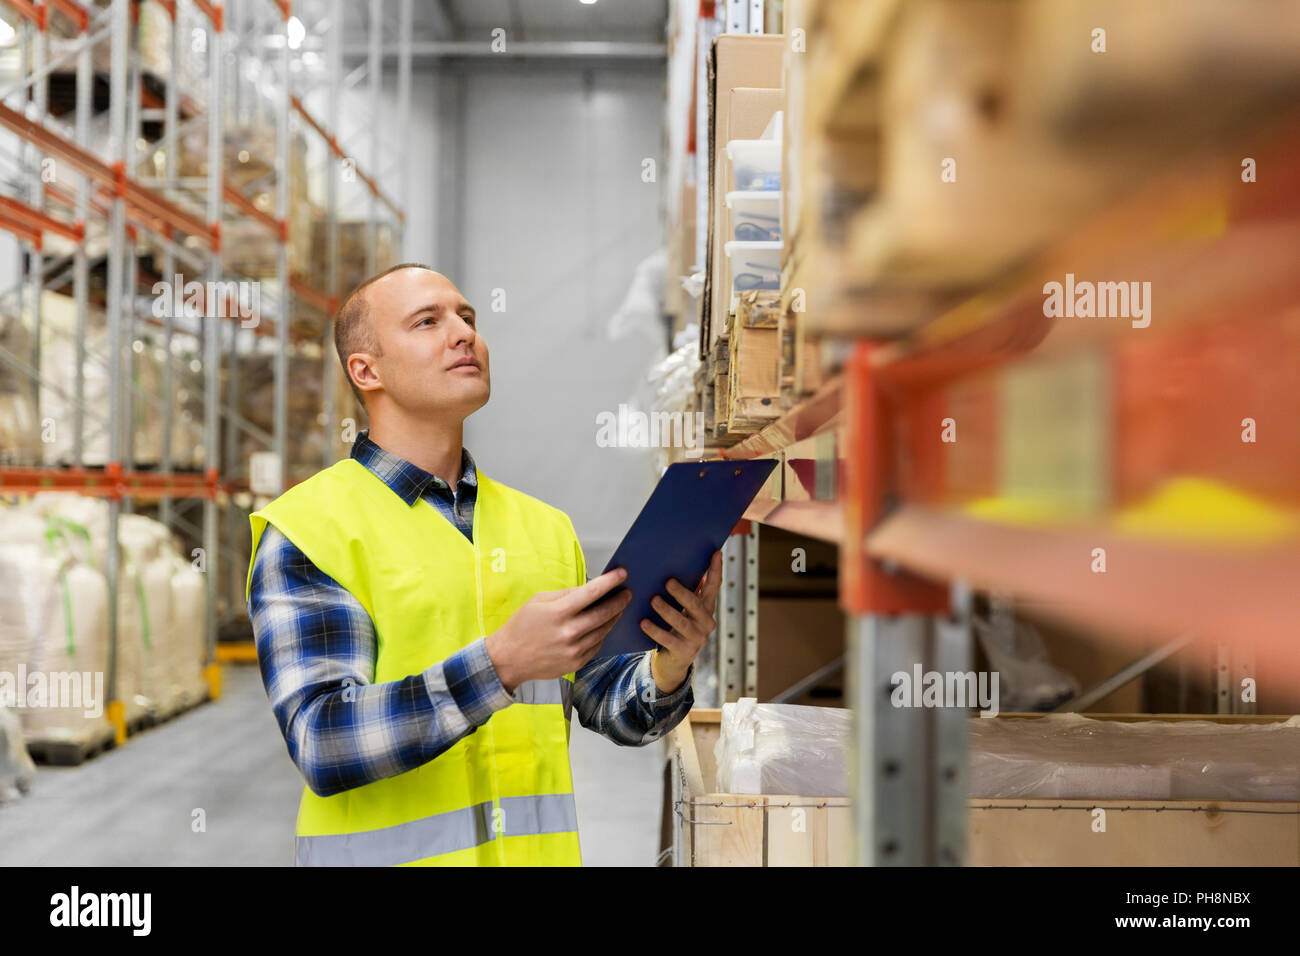 warehouse worker with clipboard in safety vest Stock Photo